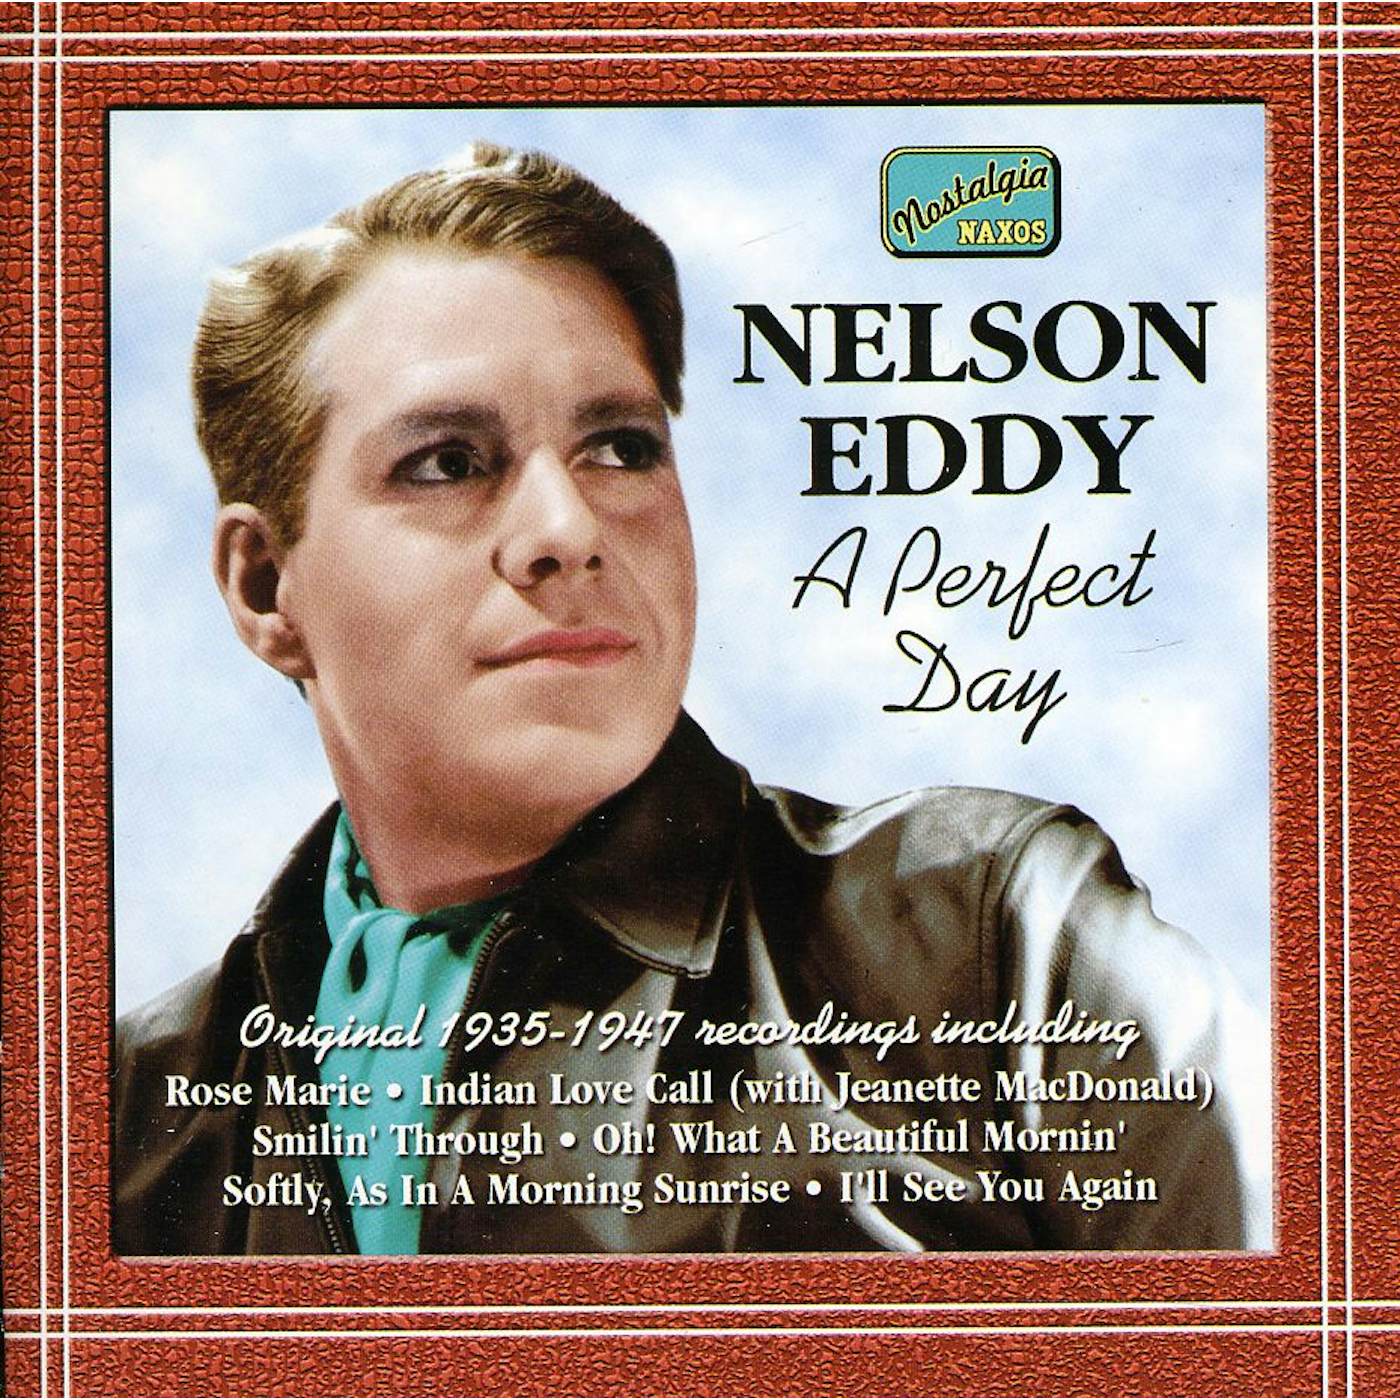 Nelson Eddy PERFECT DAY (1935-47) CD